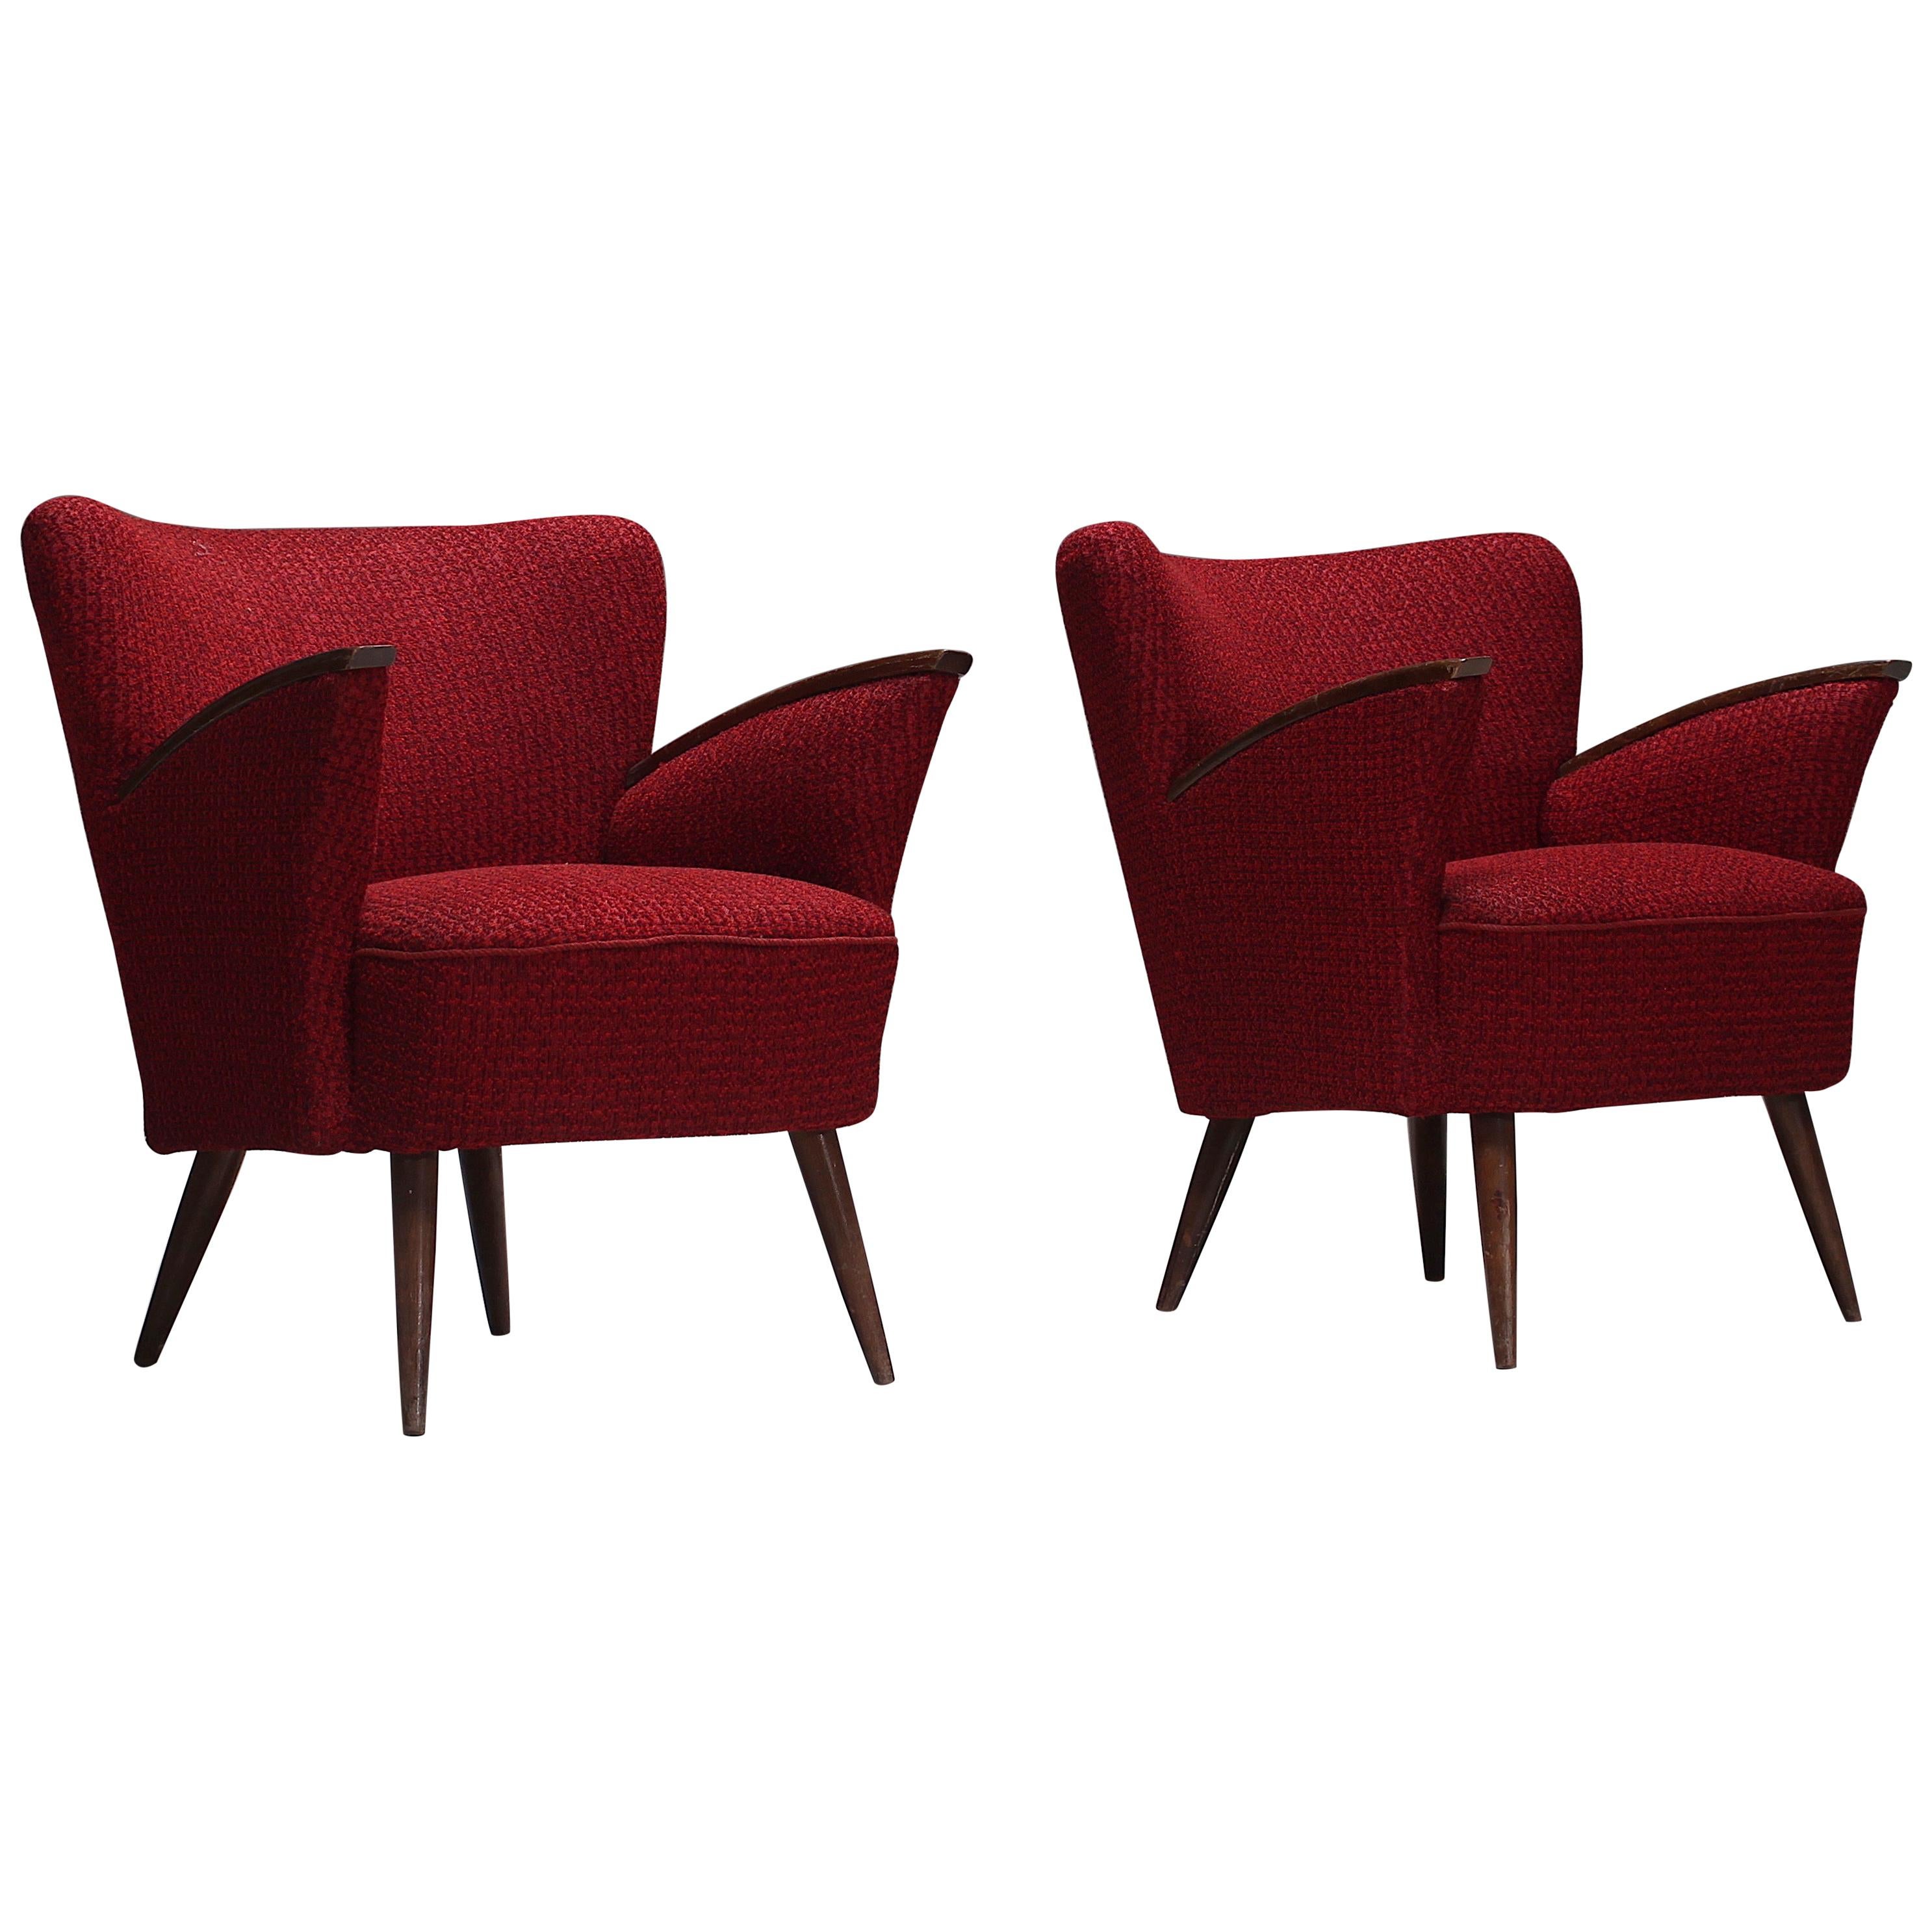 Pair of Italian Gio Ponti Style Club Chairs in Red Wool Fabric, 1950s For Sale